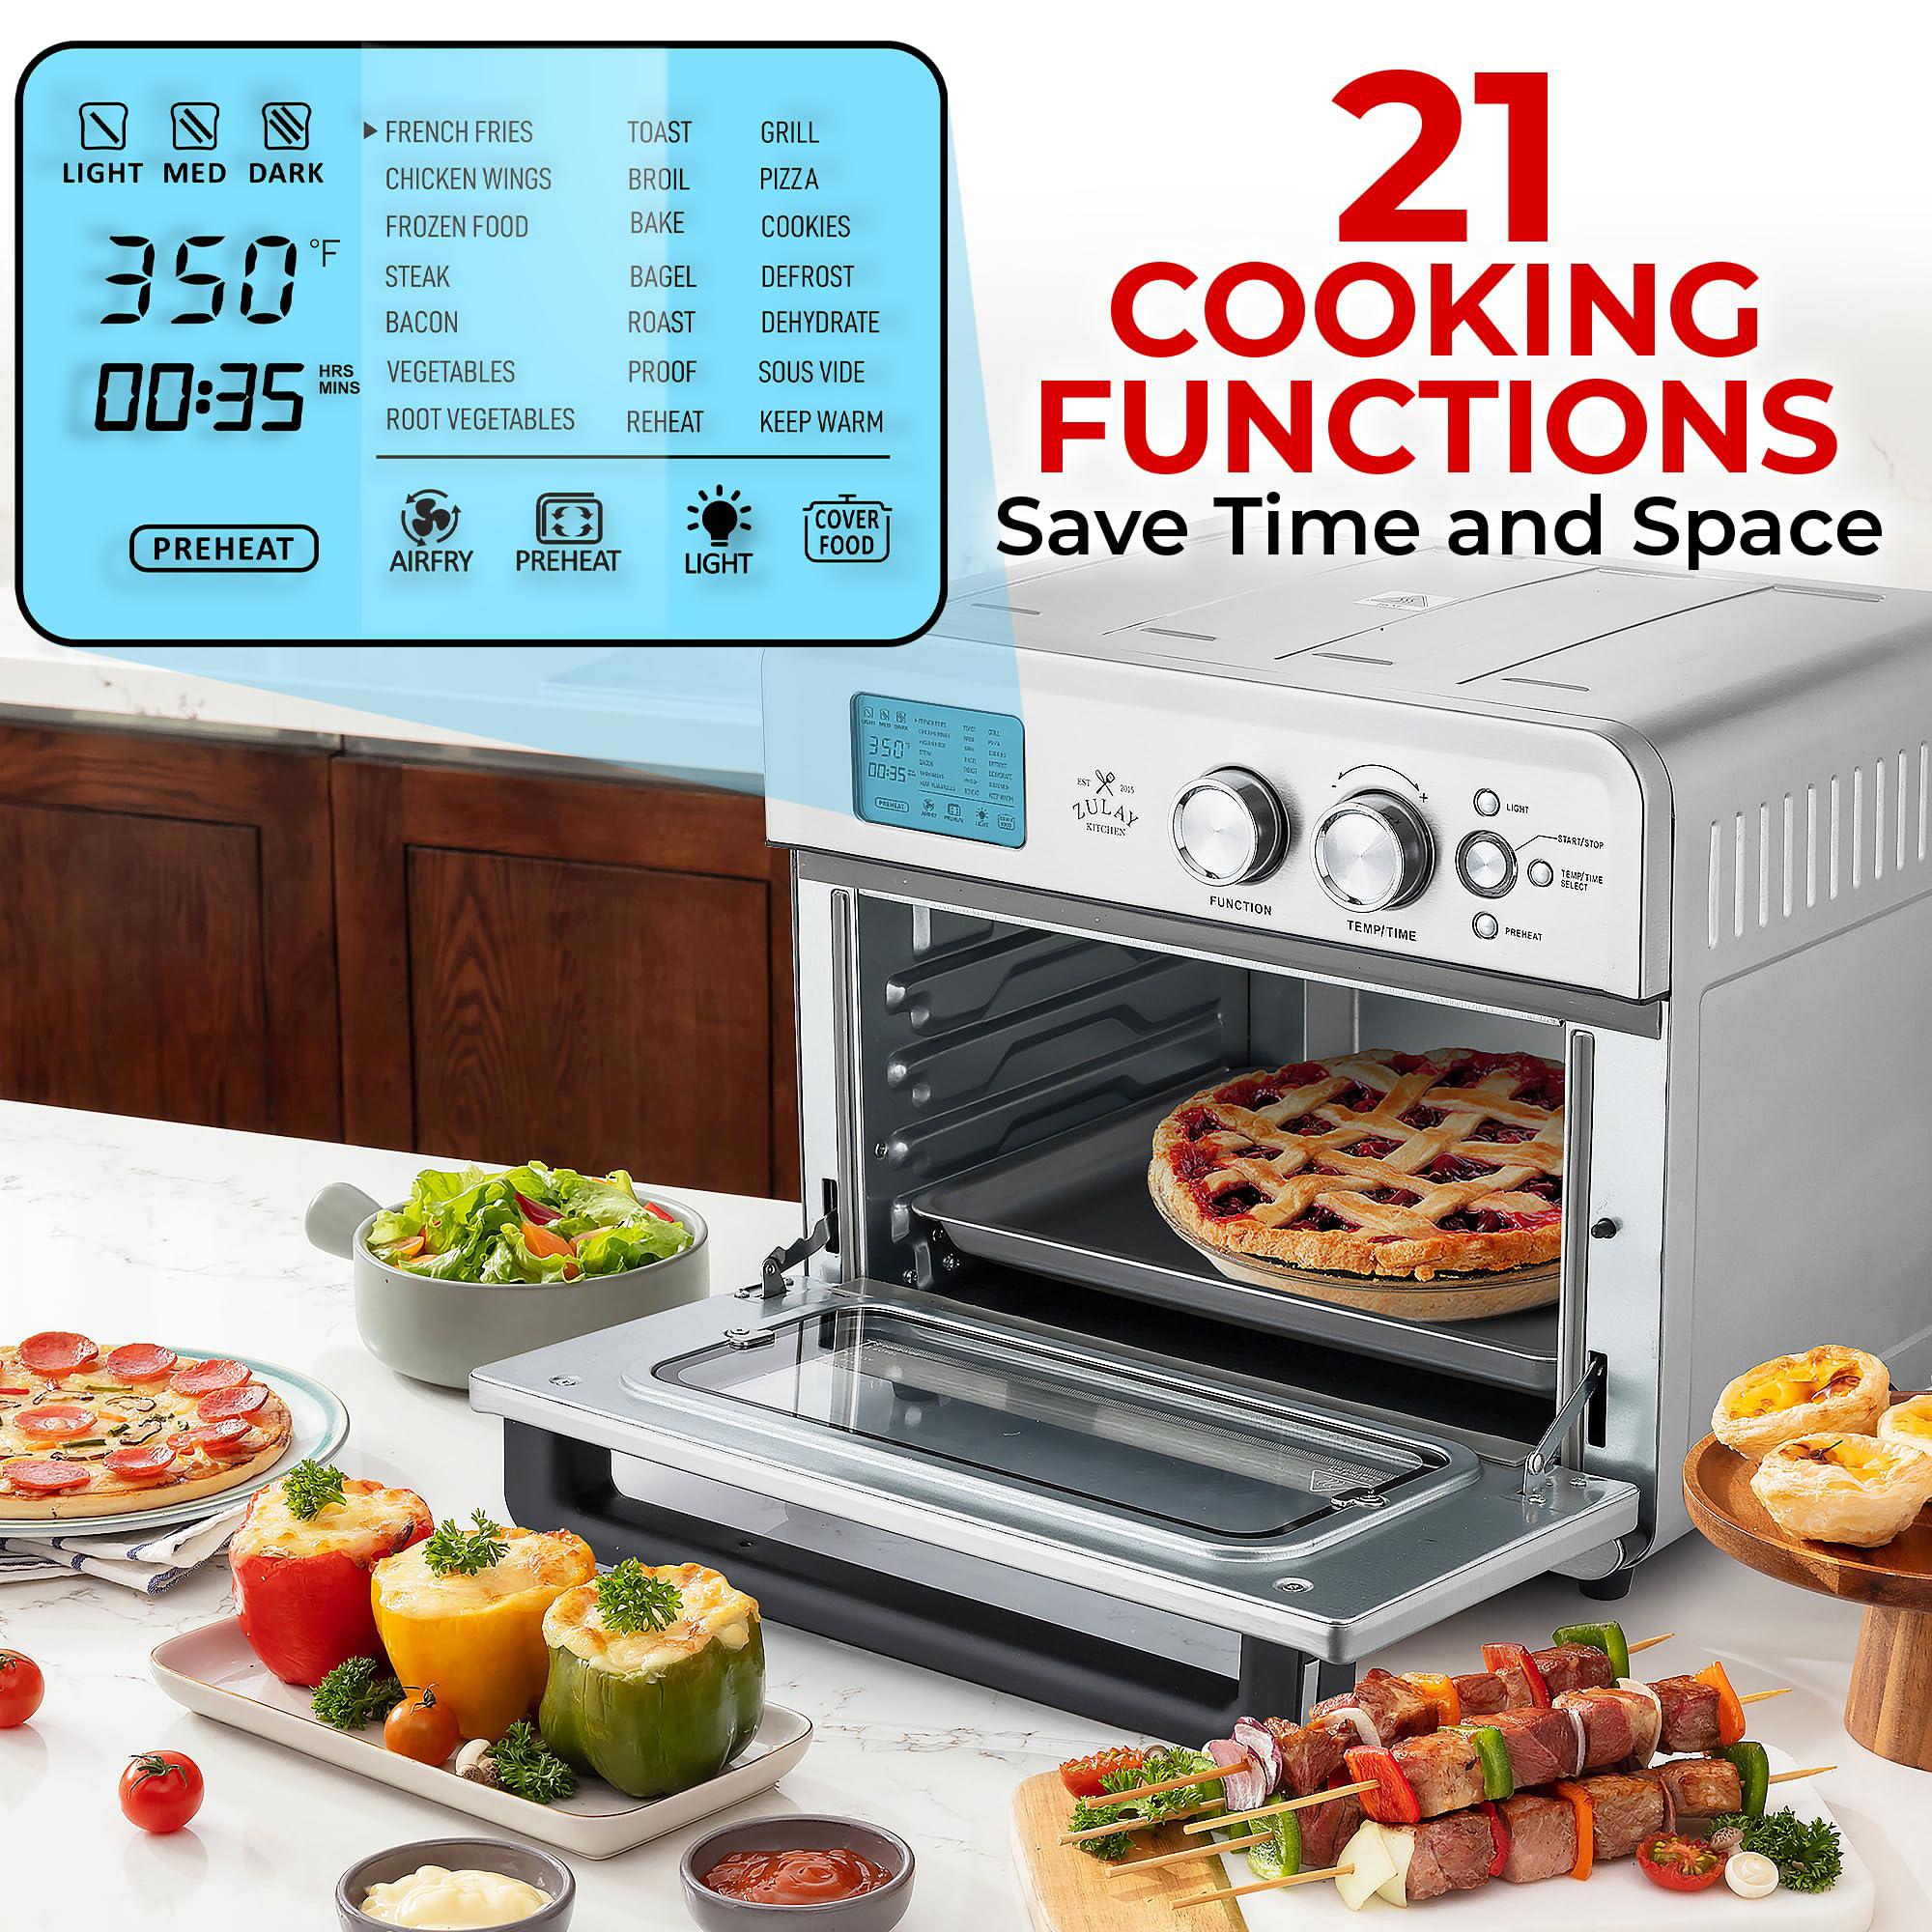 Zulay Kitchen zulay airfryer toaster oven - large toaster oven countertop - smart air fryer oven with 21 functions - 26.4qt capacity stainl